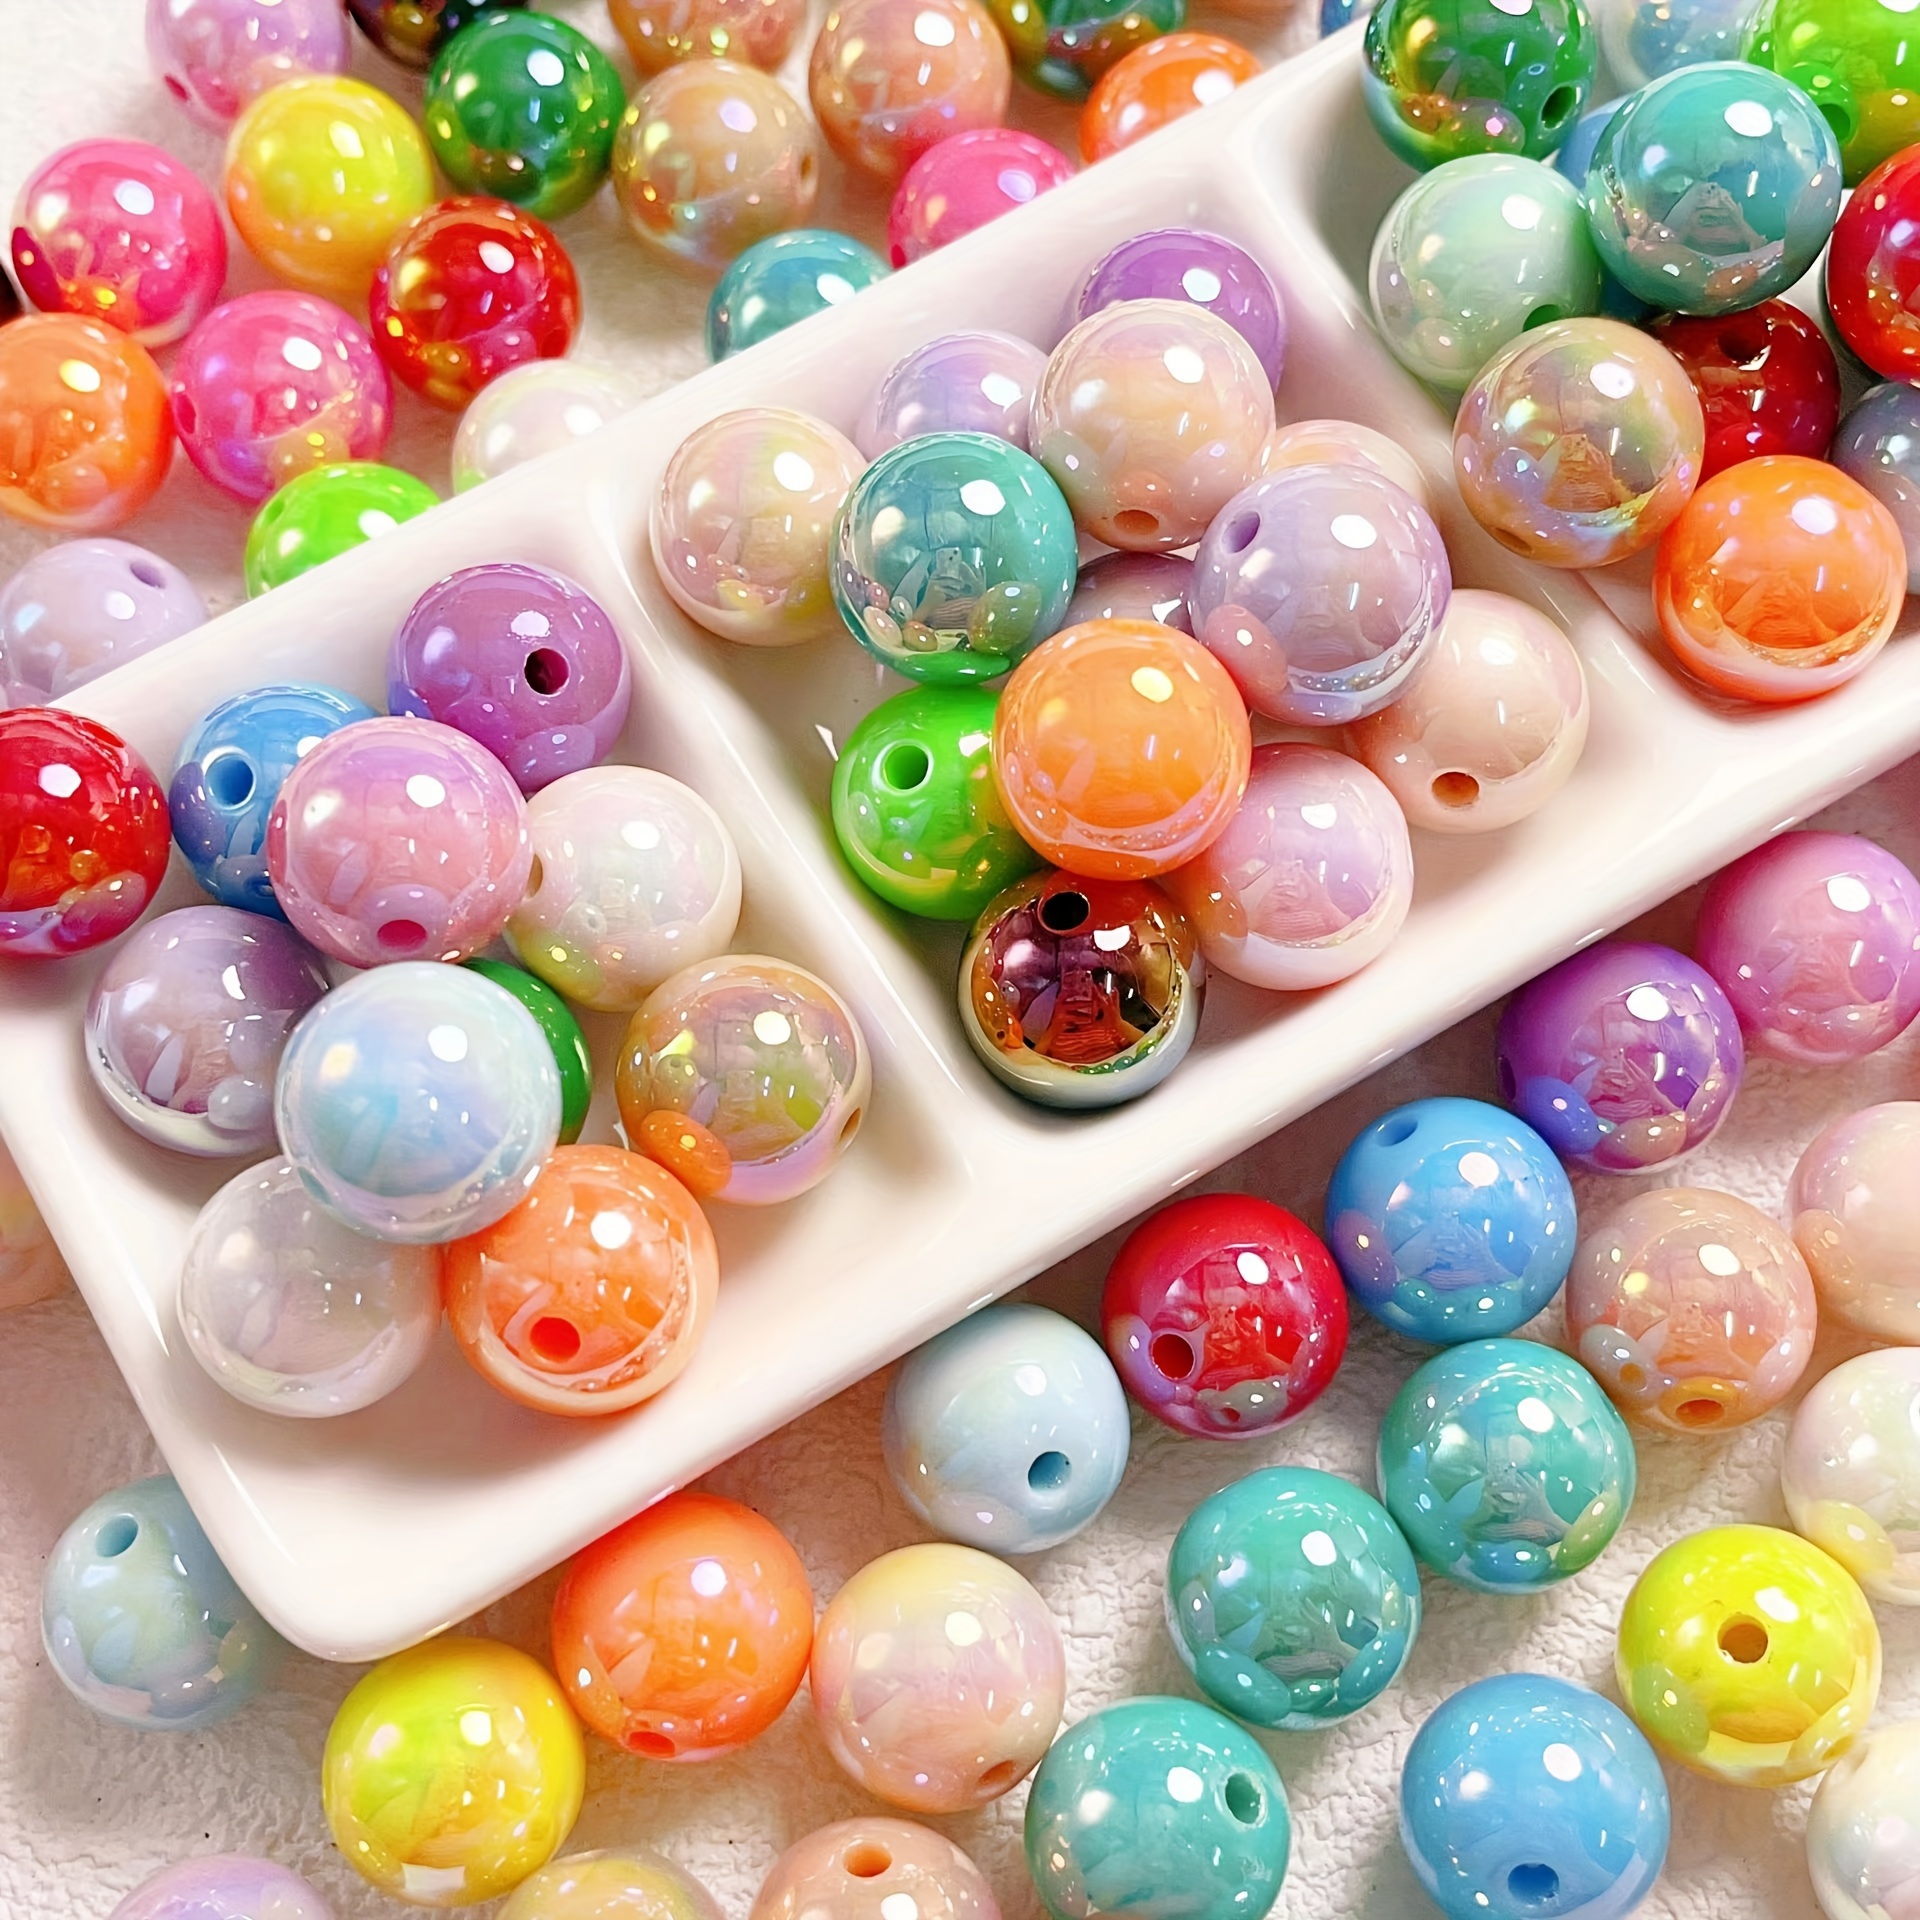 

20pcs 16mm Bright Color Round Beads For Jewelry Making, Diy Beaded Mobile Phone Chain, Bracelet, Ear Drops Accessories For King's Day